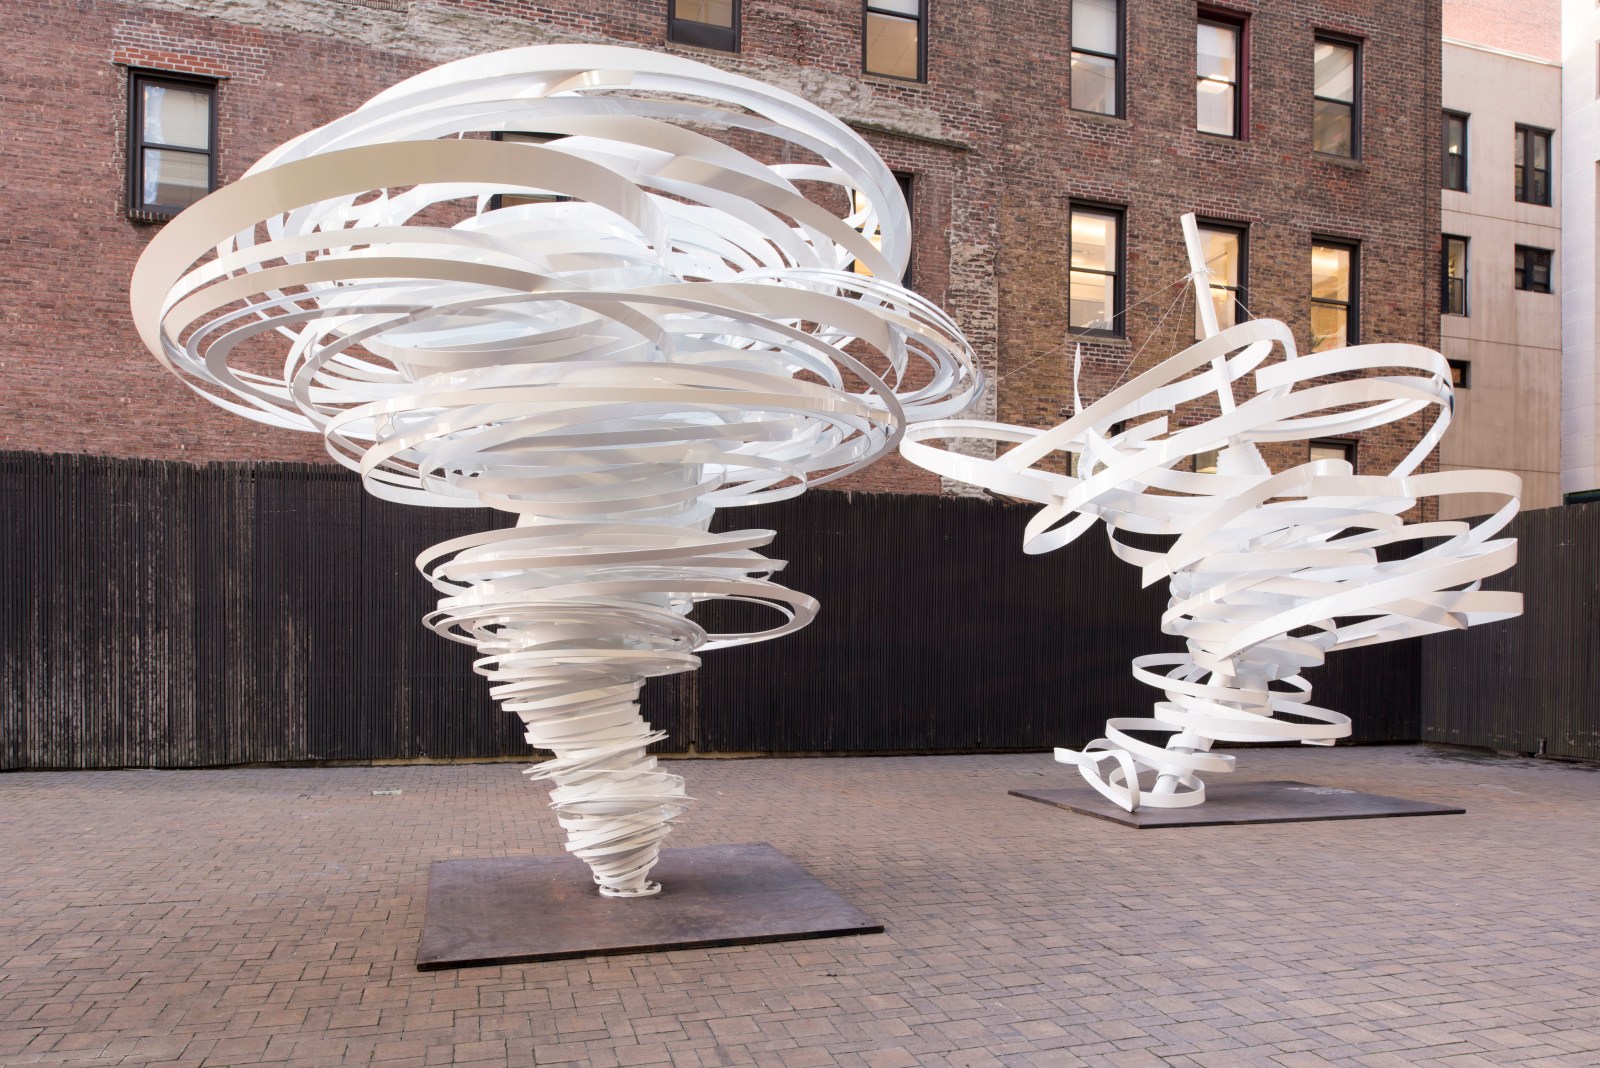 Outdoor installation view of white aluminum twisted sculptures by Alice Aycock